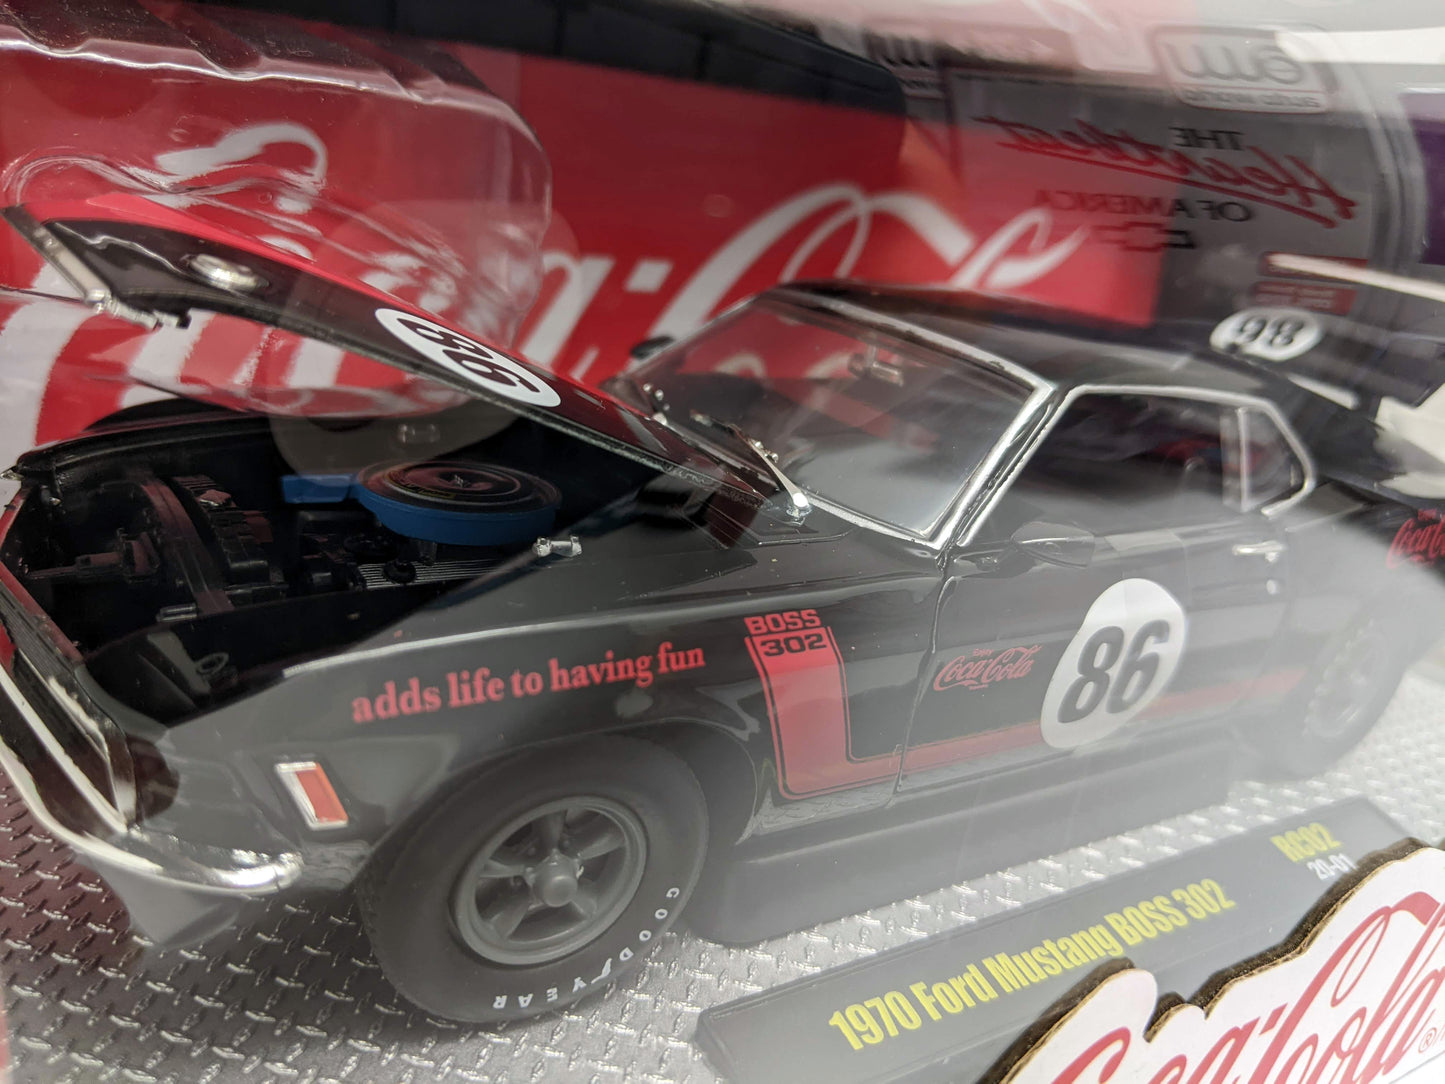 M2 1:24 Scale - 1970 Ford Mustang BOSS 302 - Coca-Cola